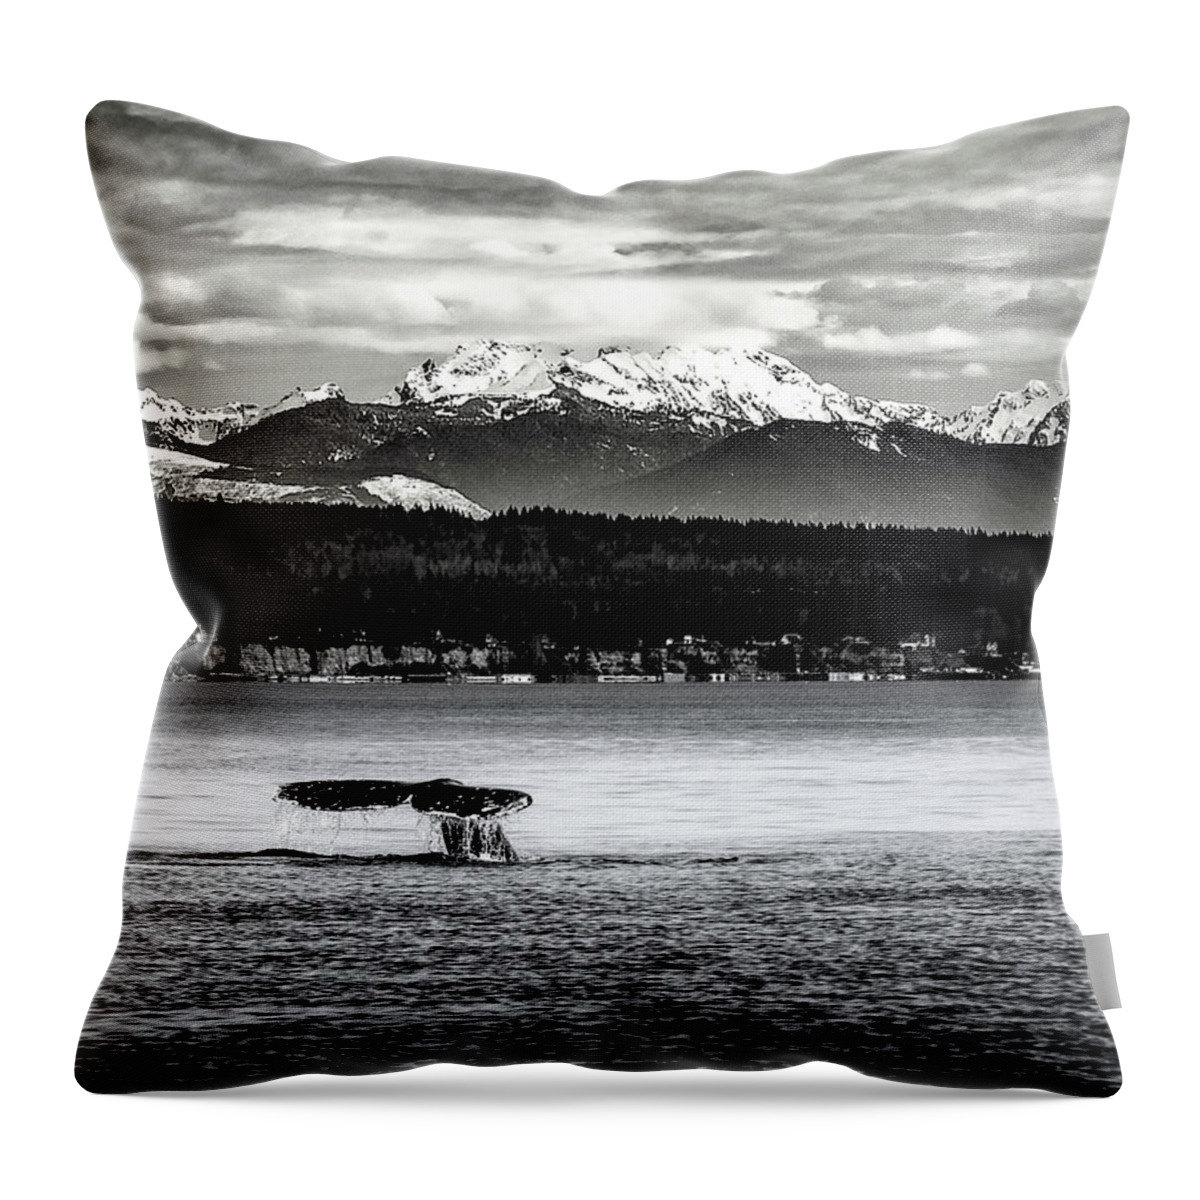 Gray Whale Throw Pillow featuring the digital art Whale Tail by Ken Taylor